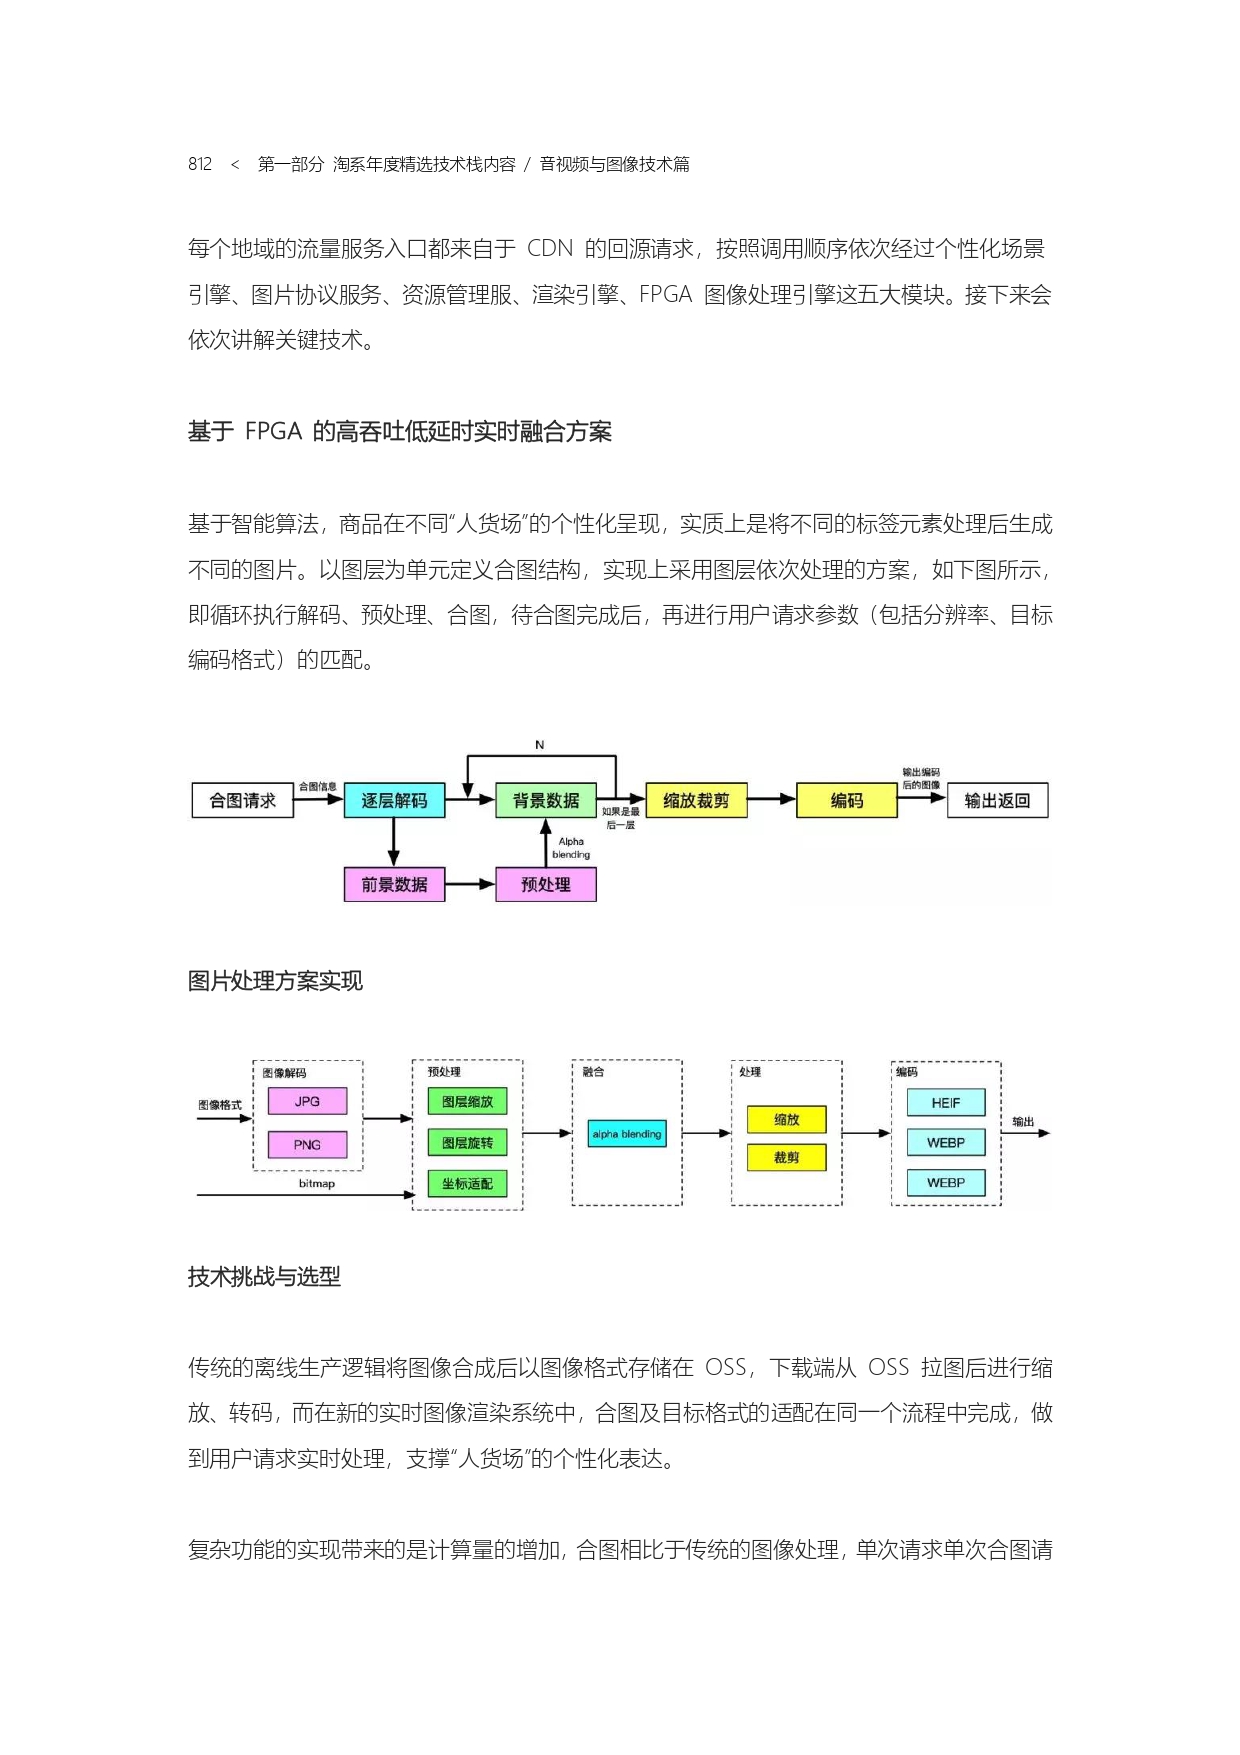 The Complete Works of Tao Technology 2020-571-1189-1-300_page-0242.jpg